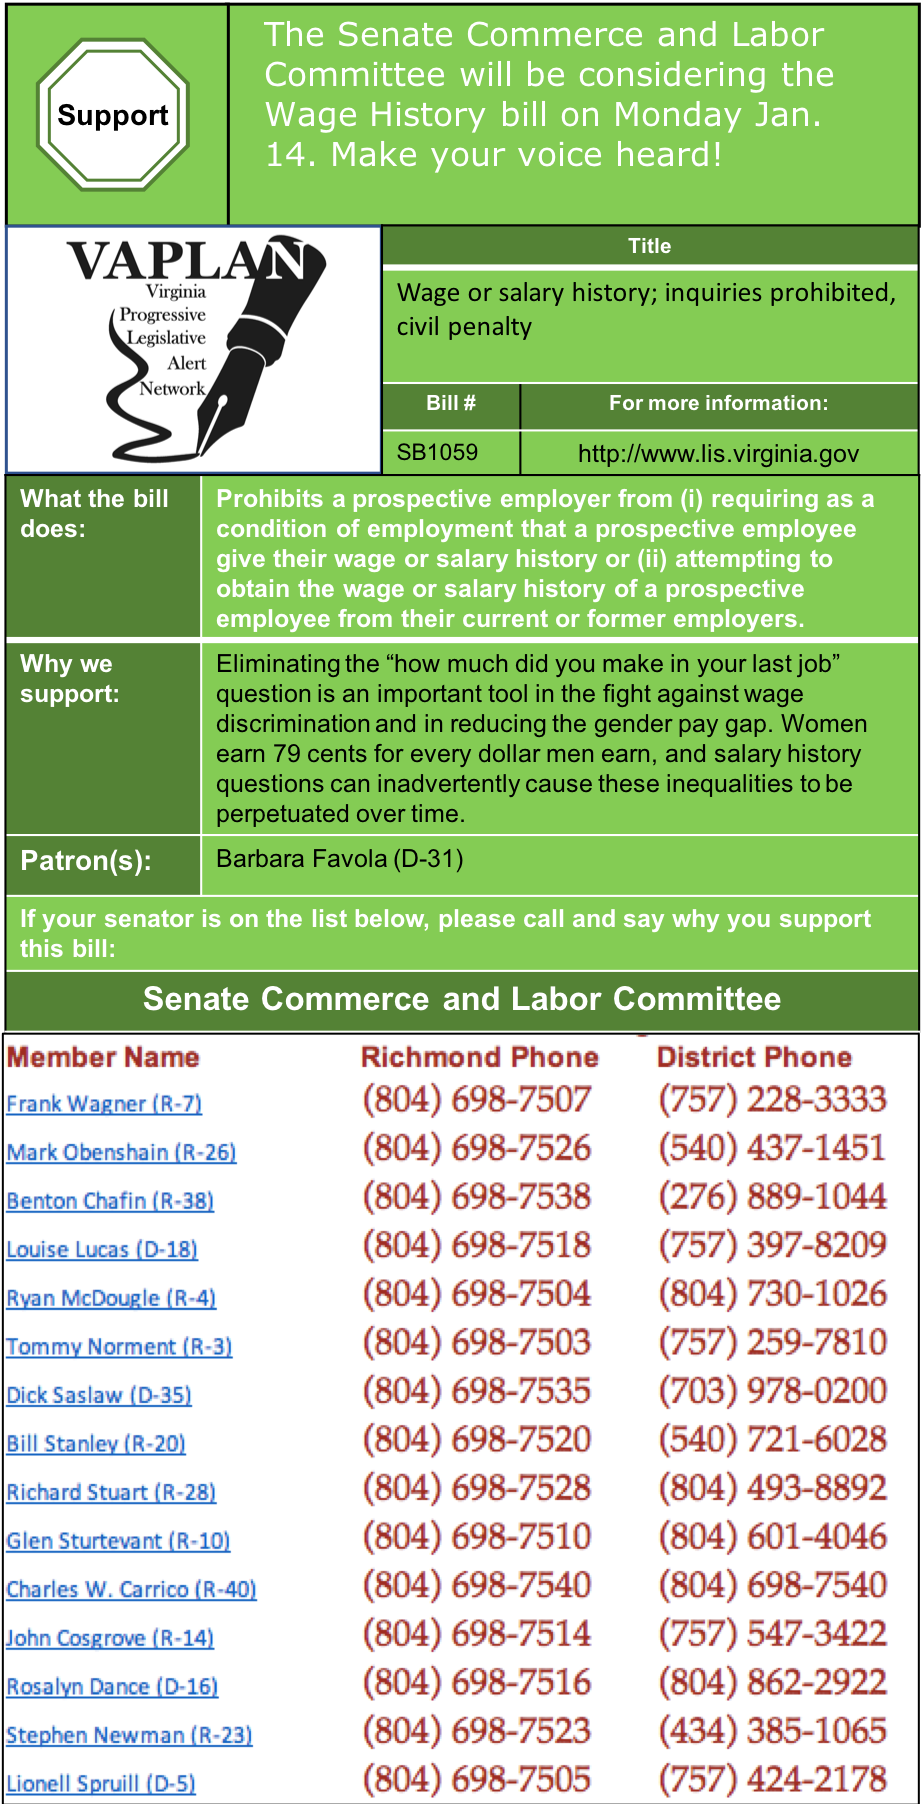 ALERT: Support Ending Wage History Question in Senate Commerce & Labor